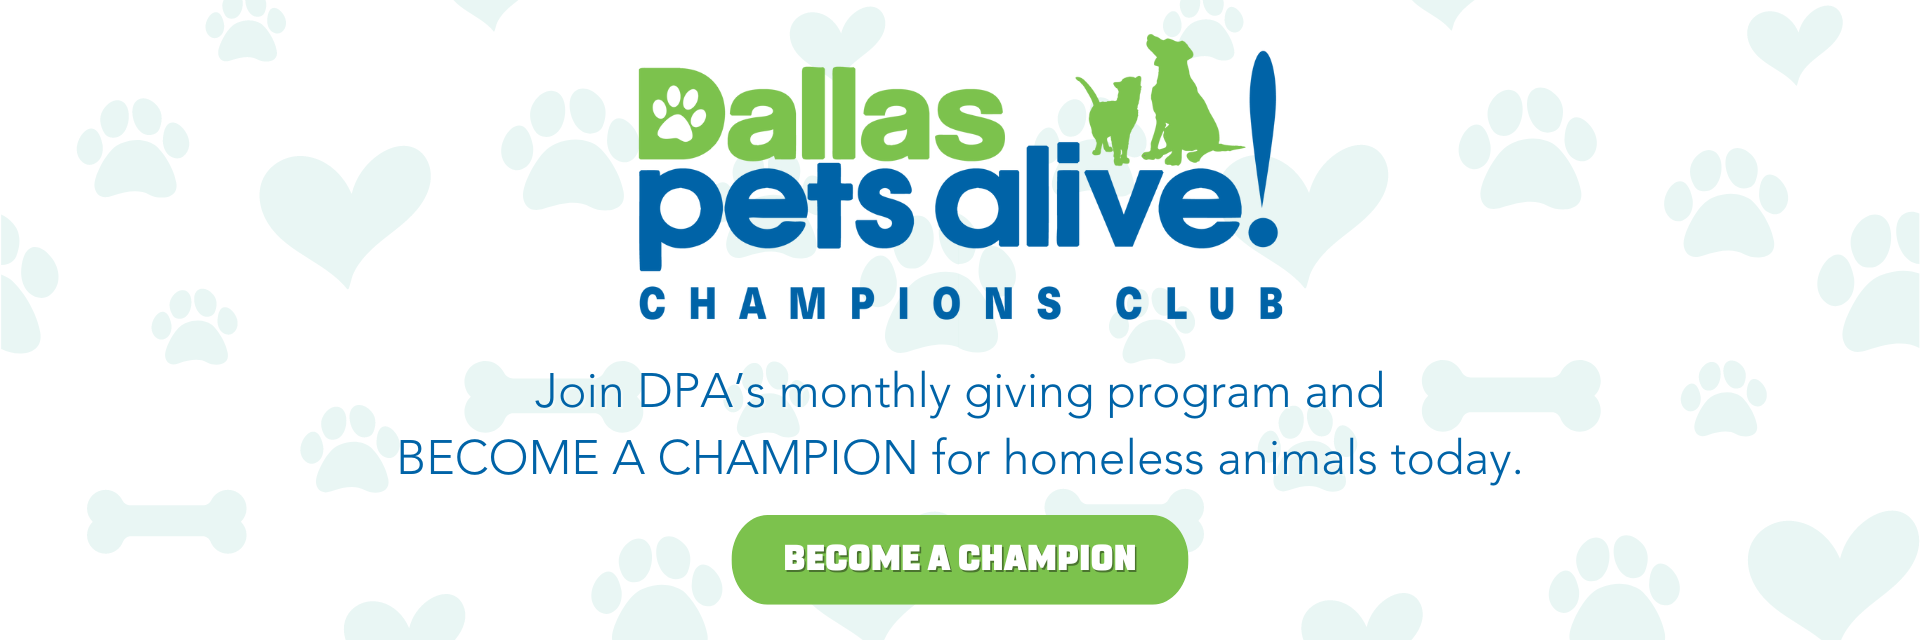 Join DPA's monthly giving program and BECOME A CHAMPION for homeless animals today.